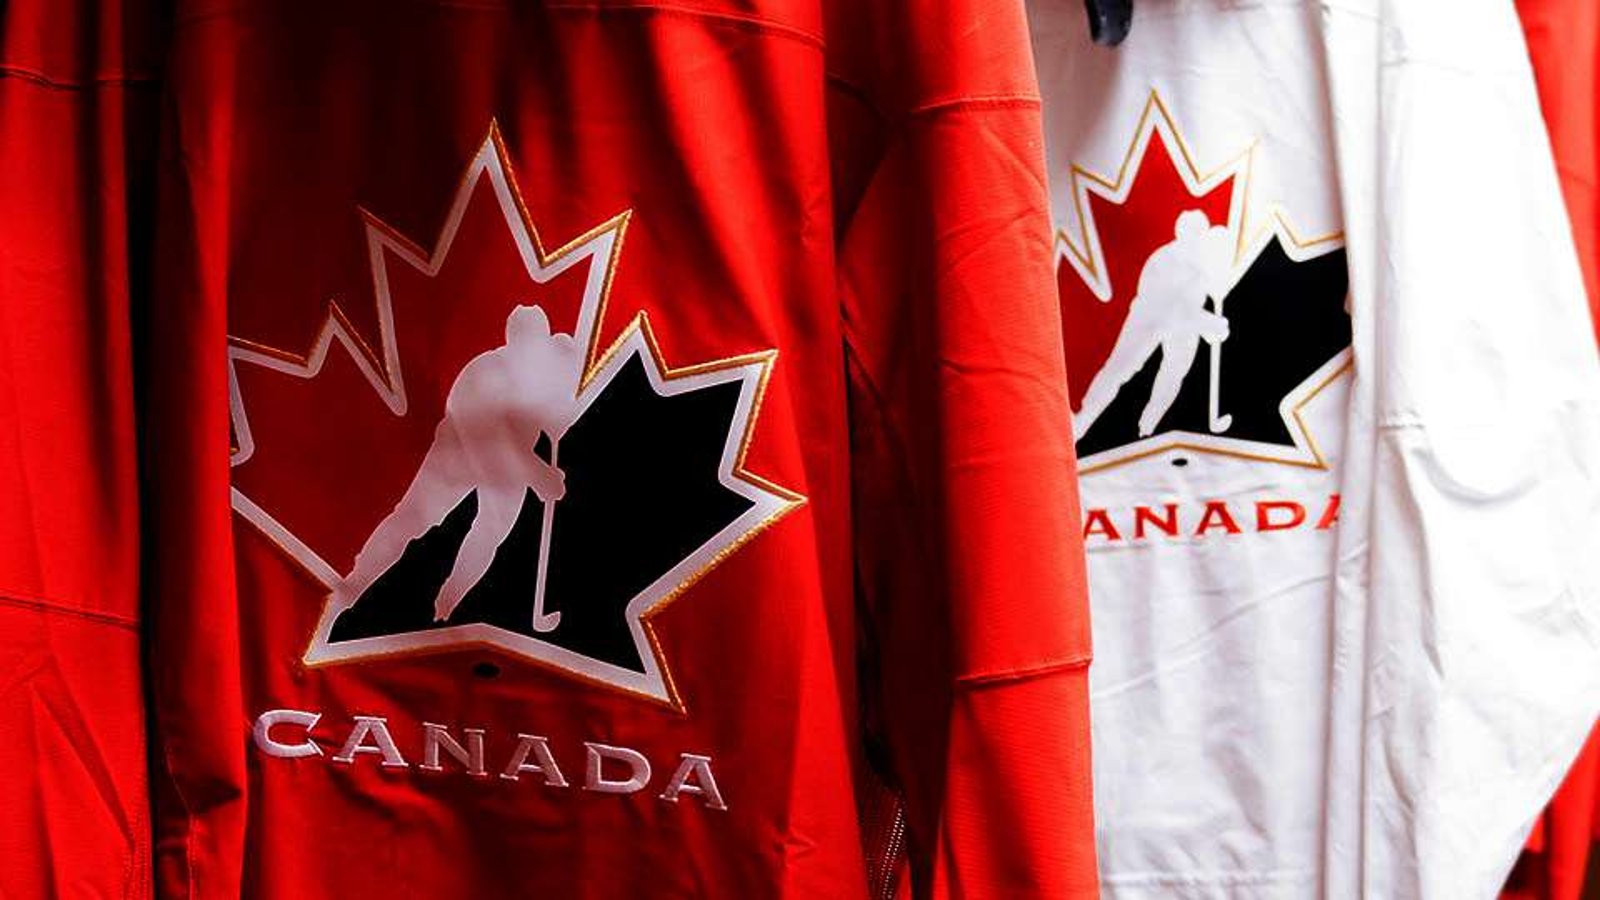 HOCKEY CANADA: 11 victimes supplémentaires se manifestent